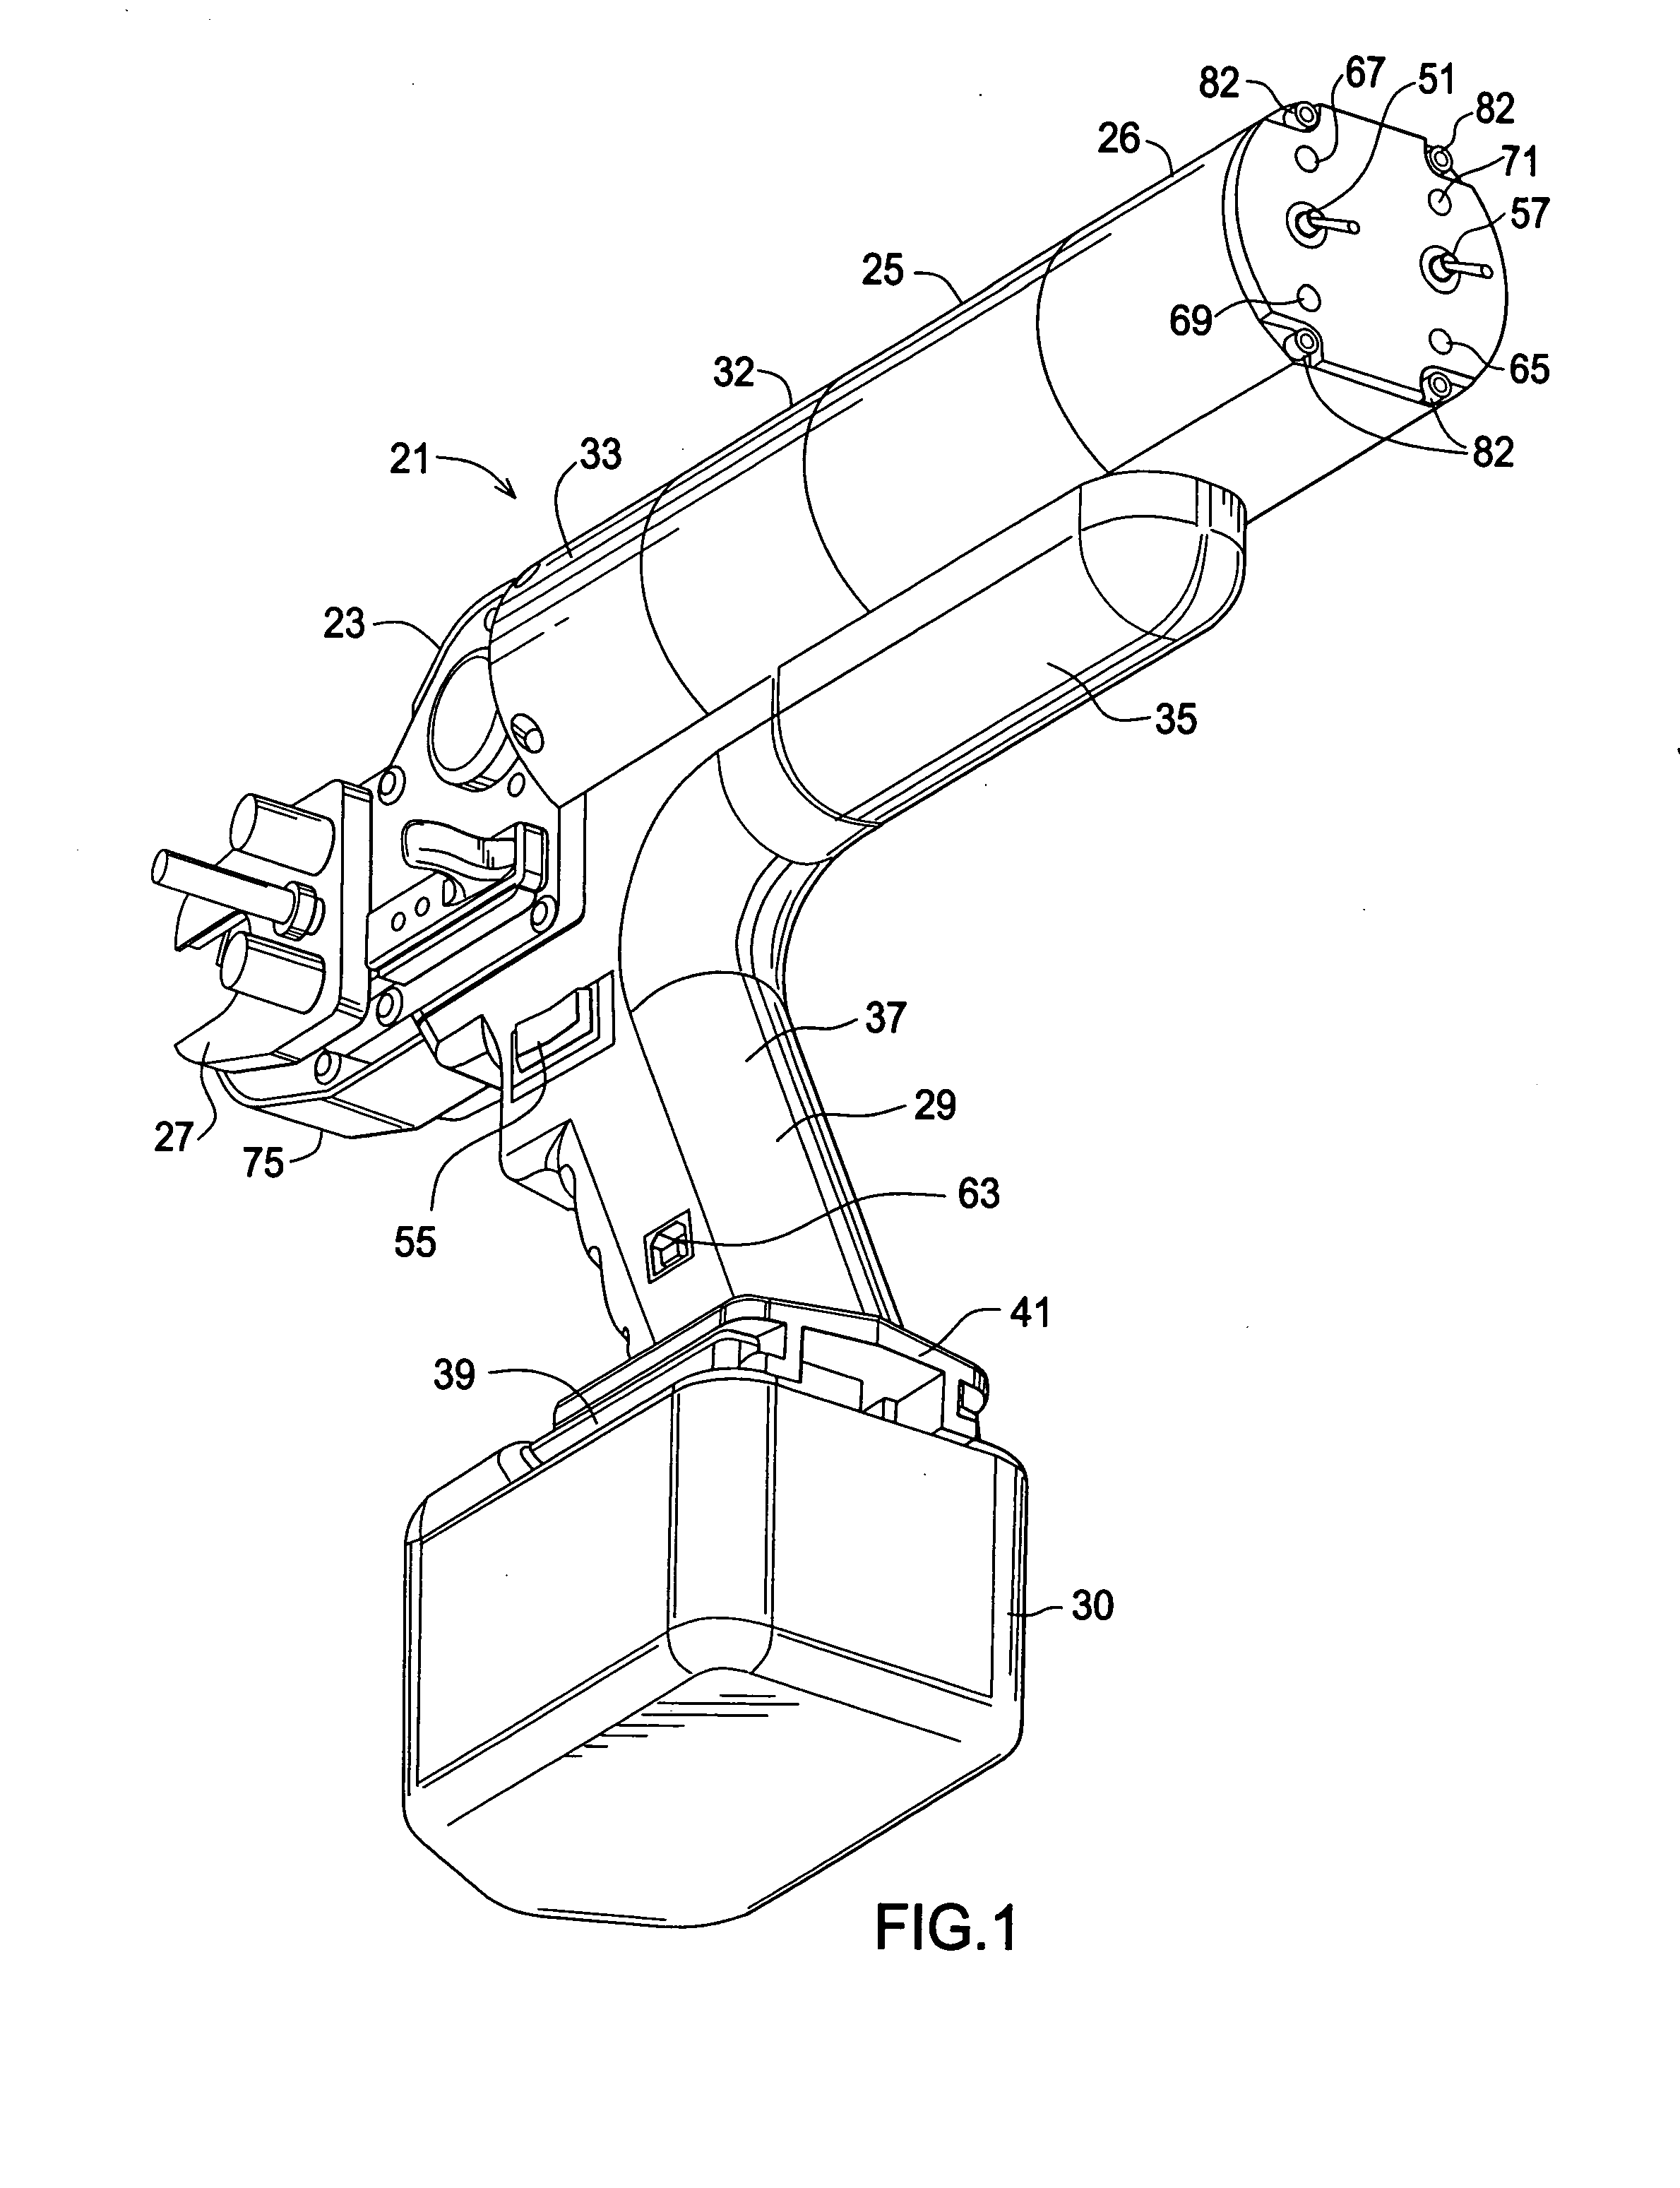 Drive engagement, safety and control apparatus for a powered connector driver